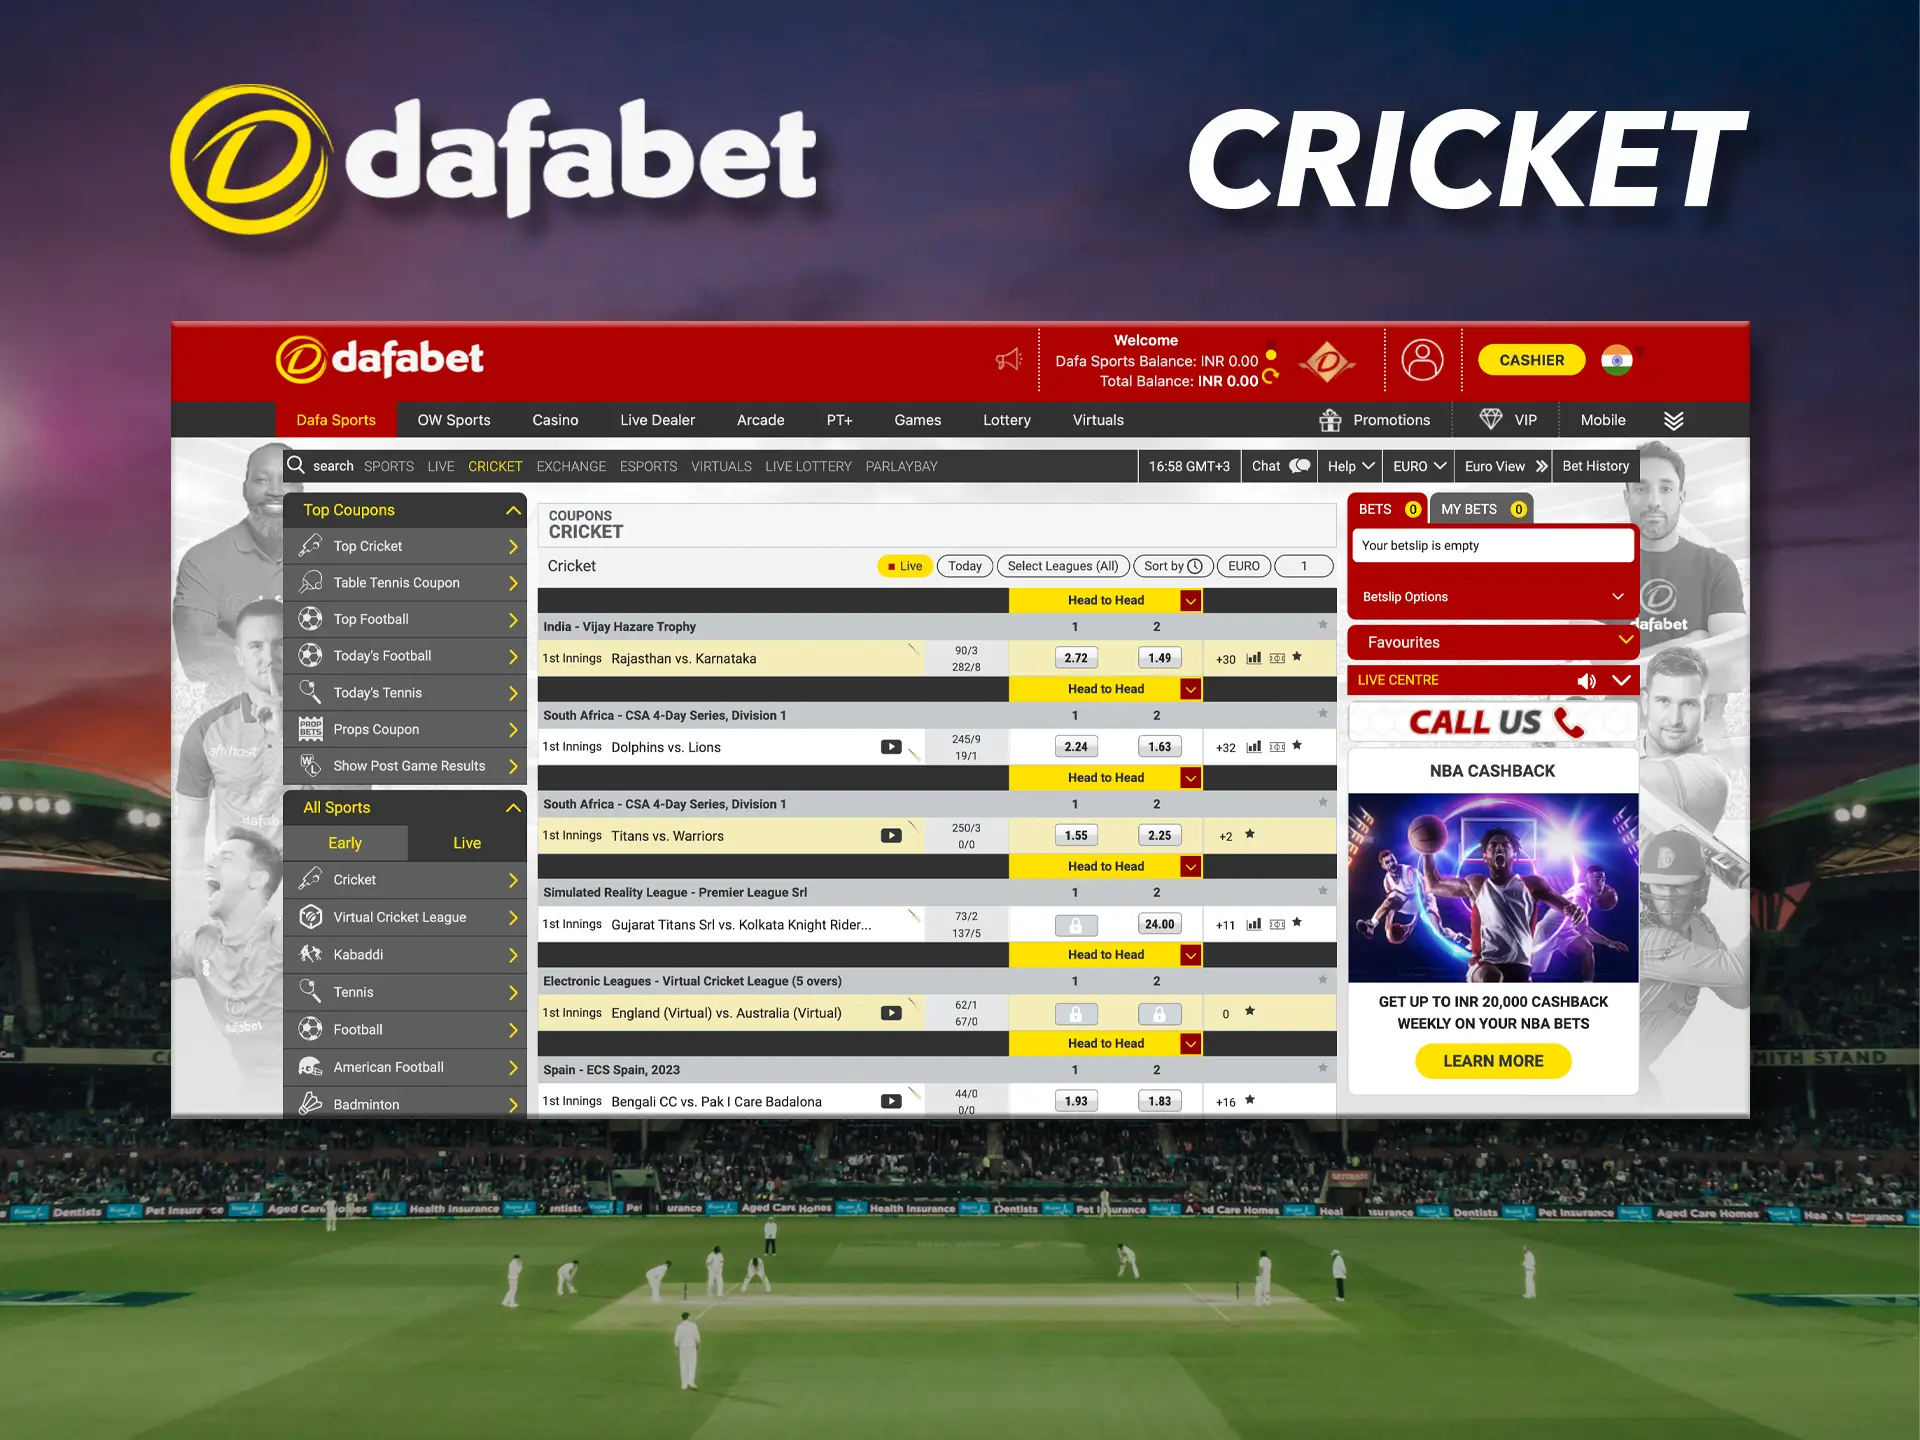 Use your predictions when betting on cricket at Dafabet.